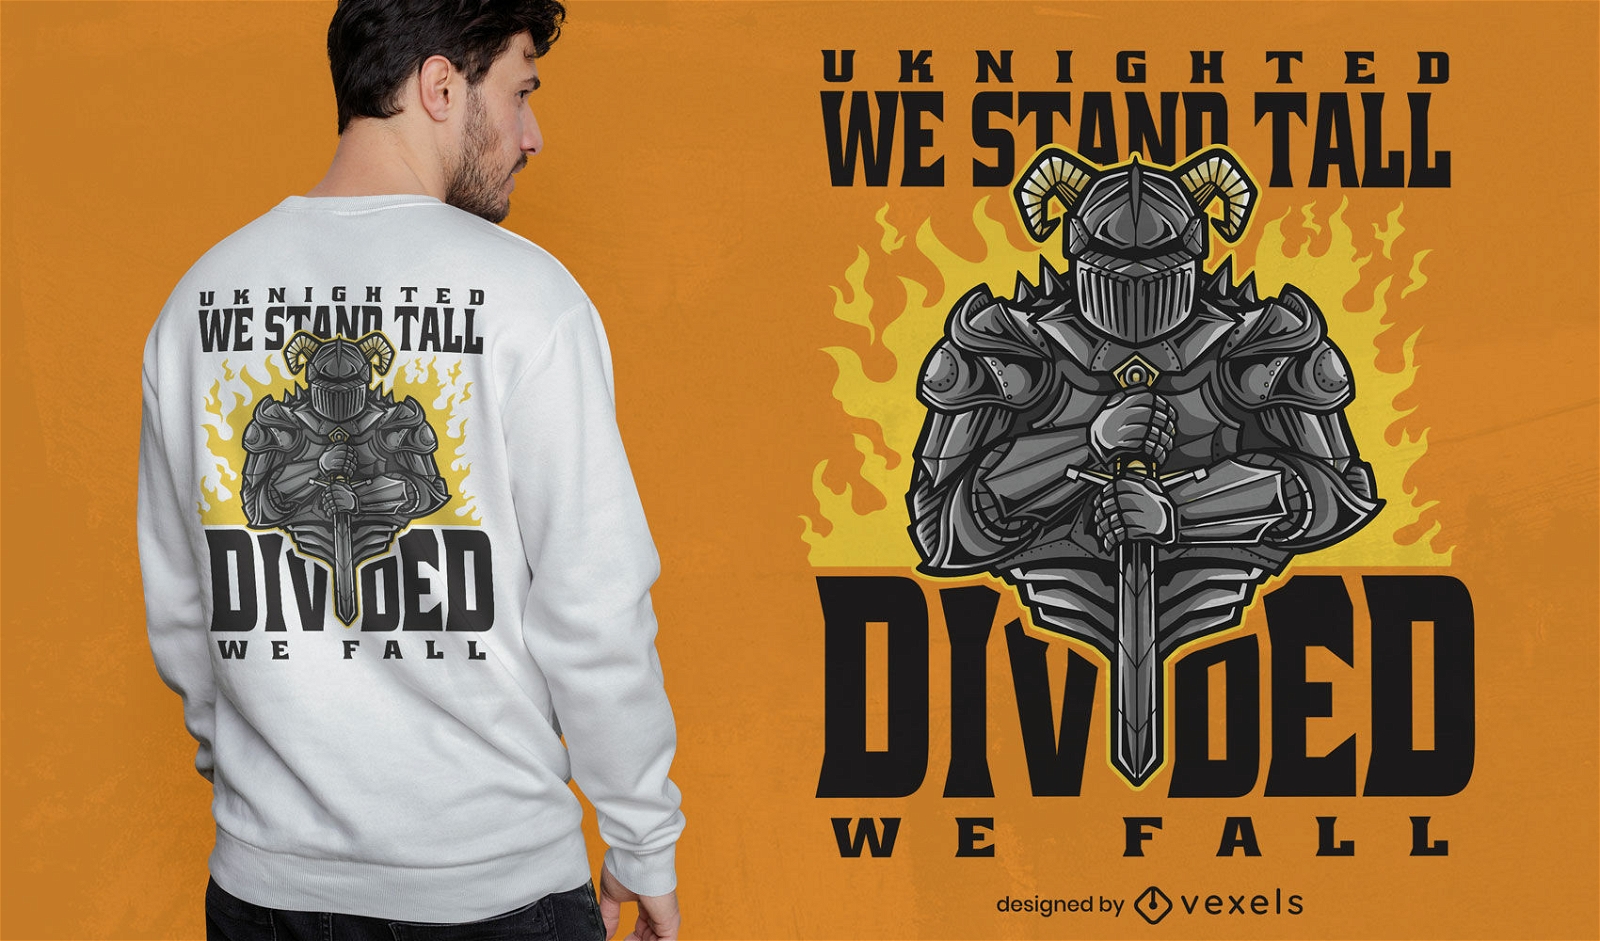 Knight quote t-shirt design